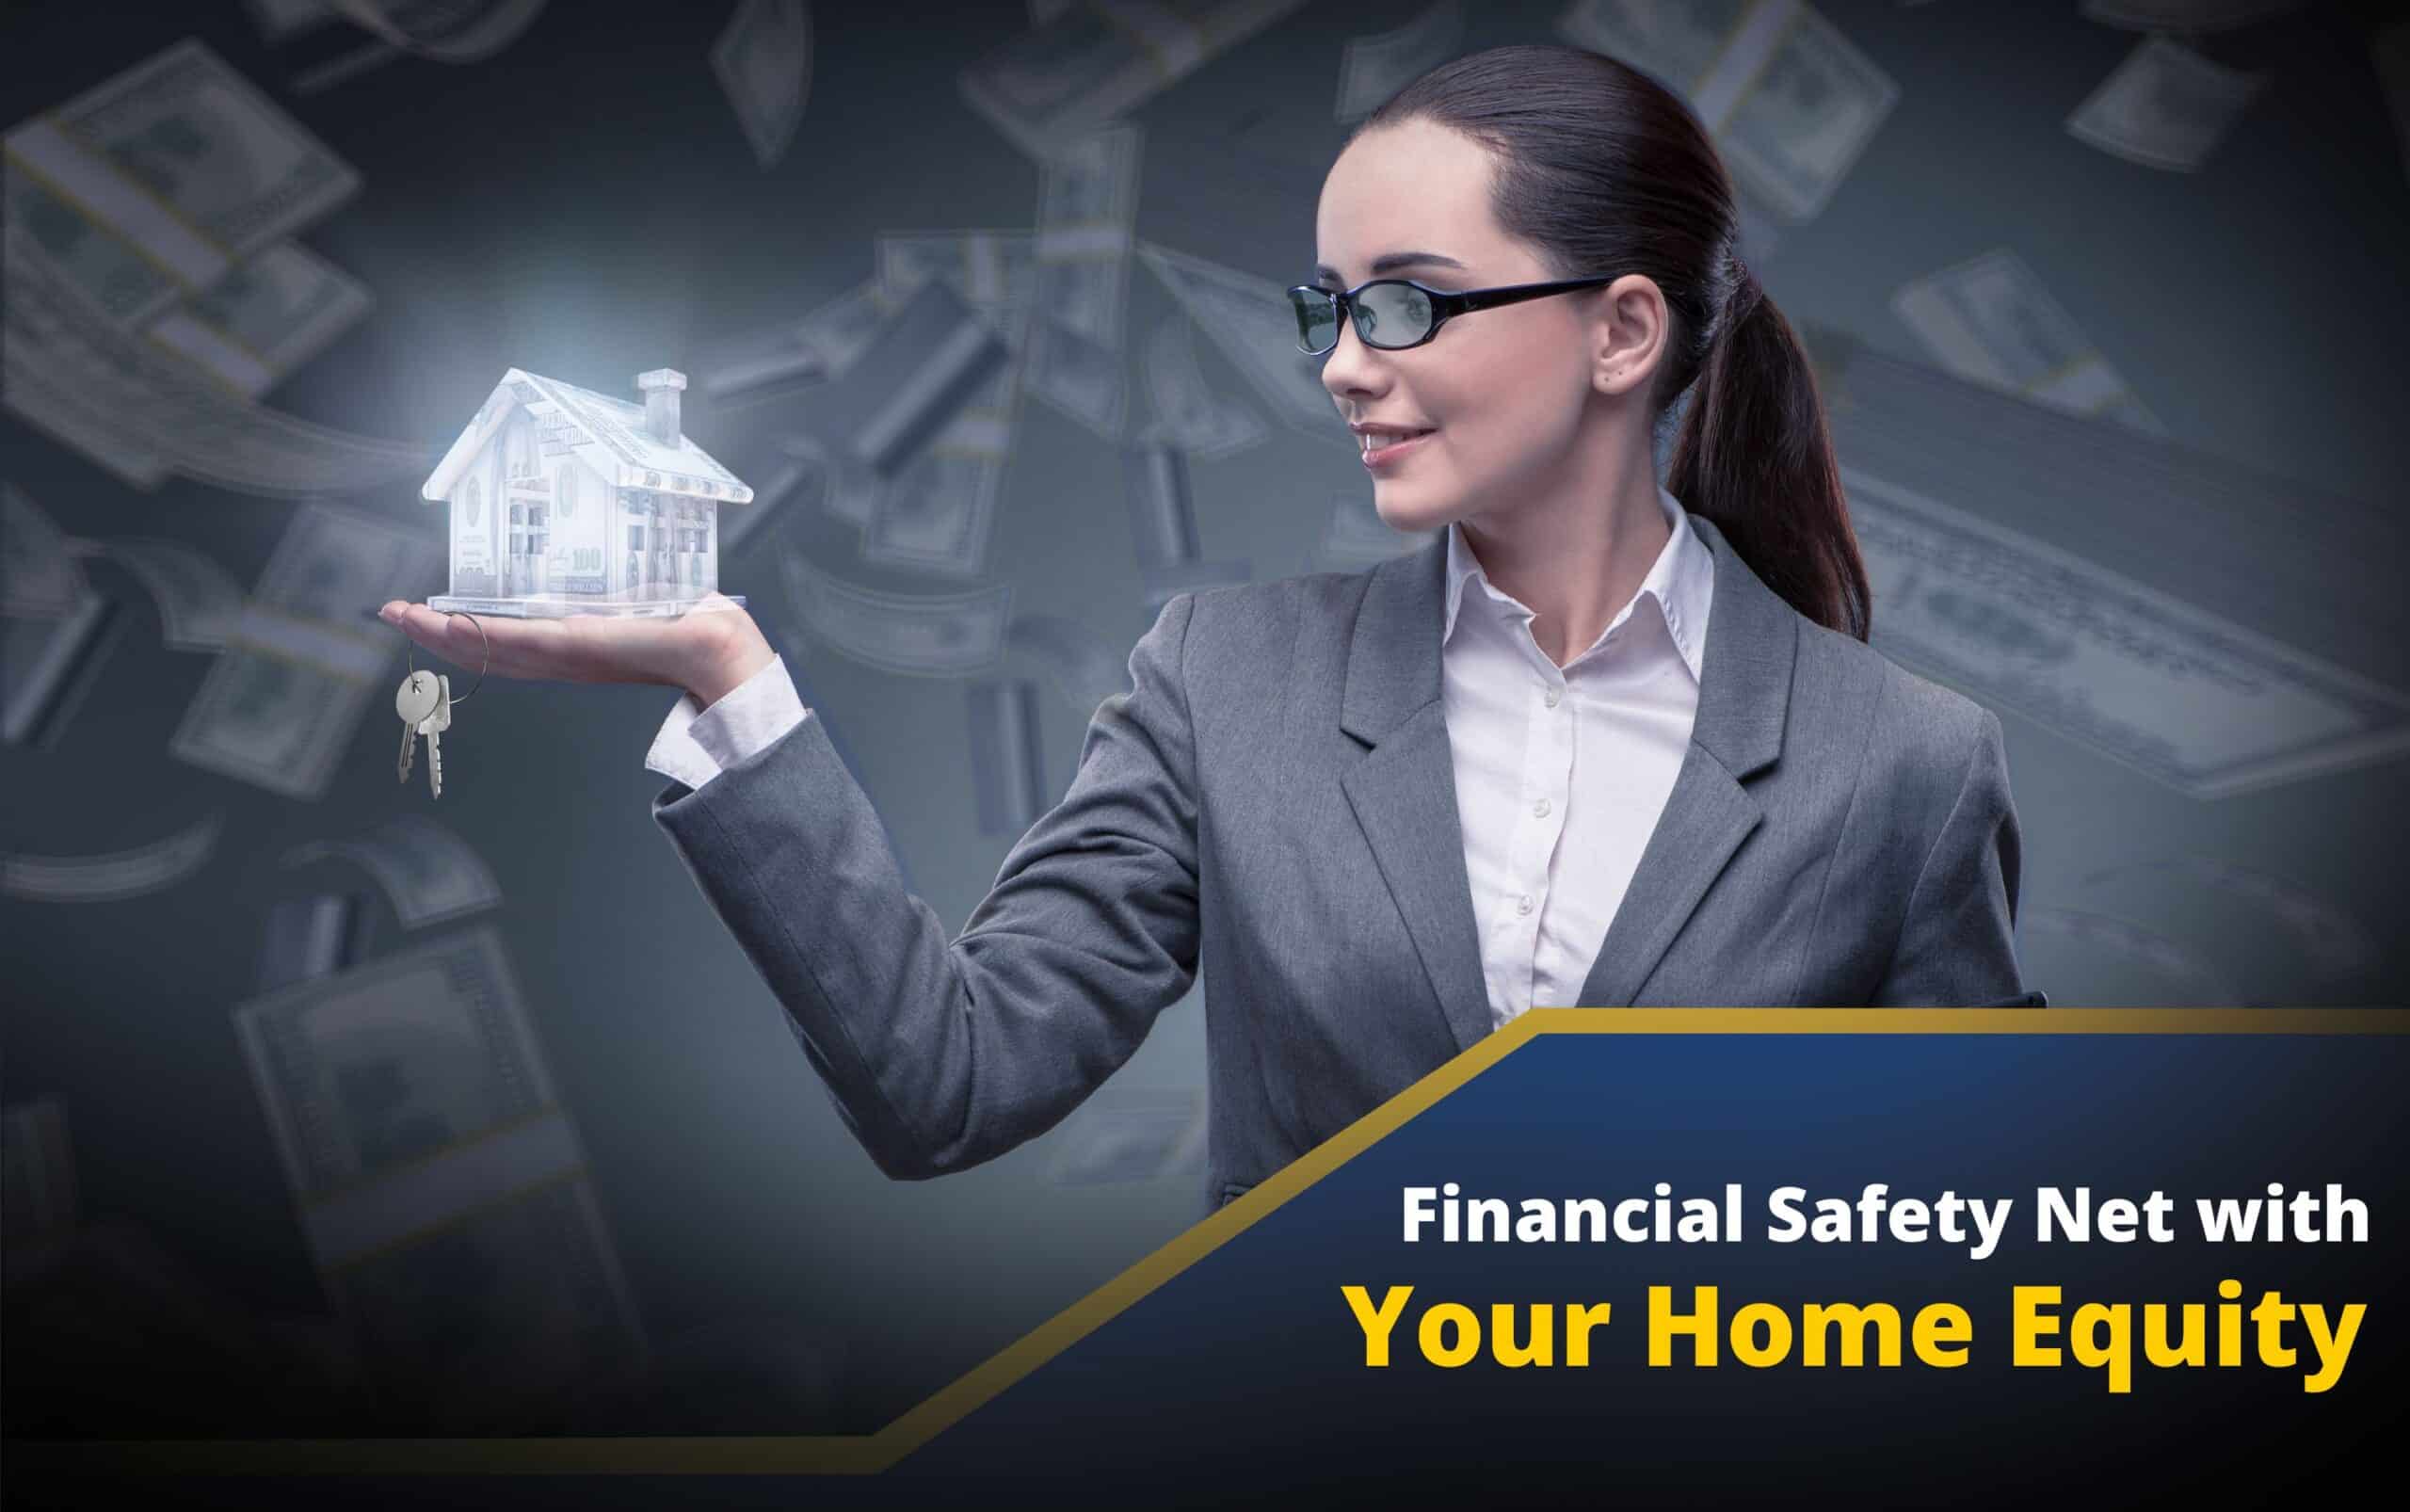 Build Yourself a Financial Safety Net with Your Home Equity